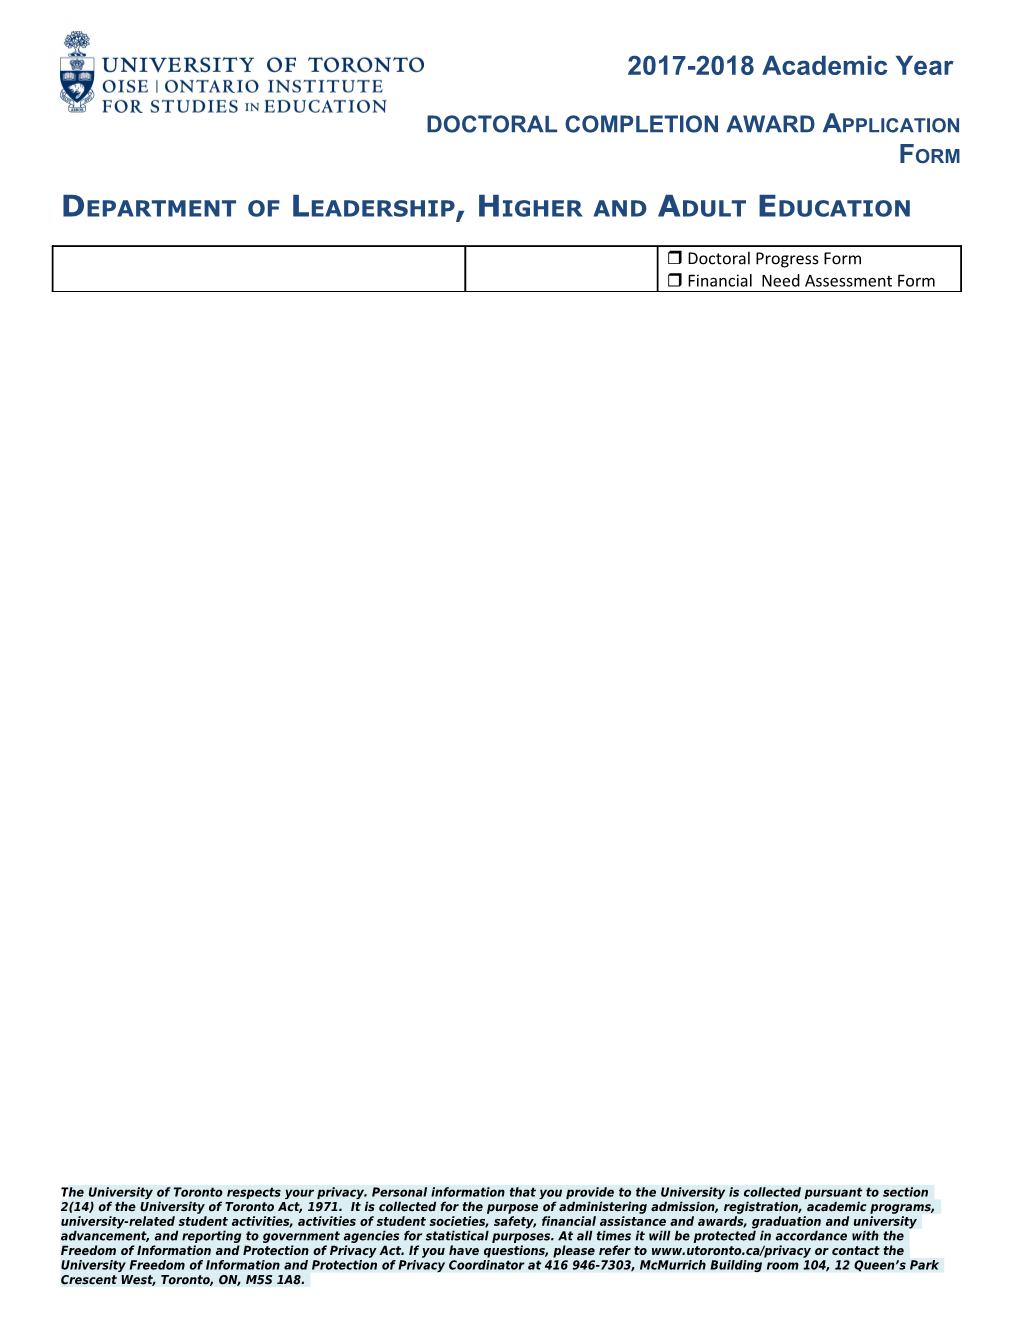 Department of Leadership, Higher and Adult Education